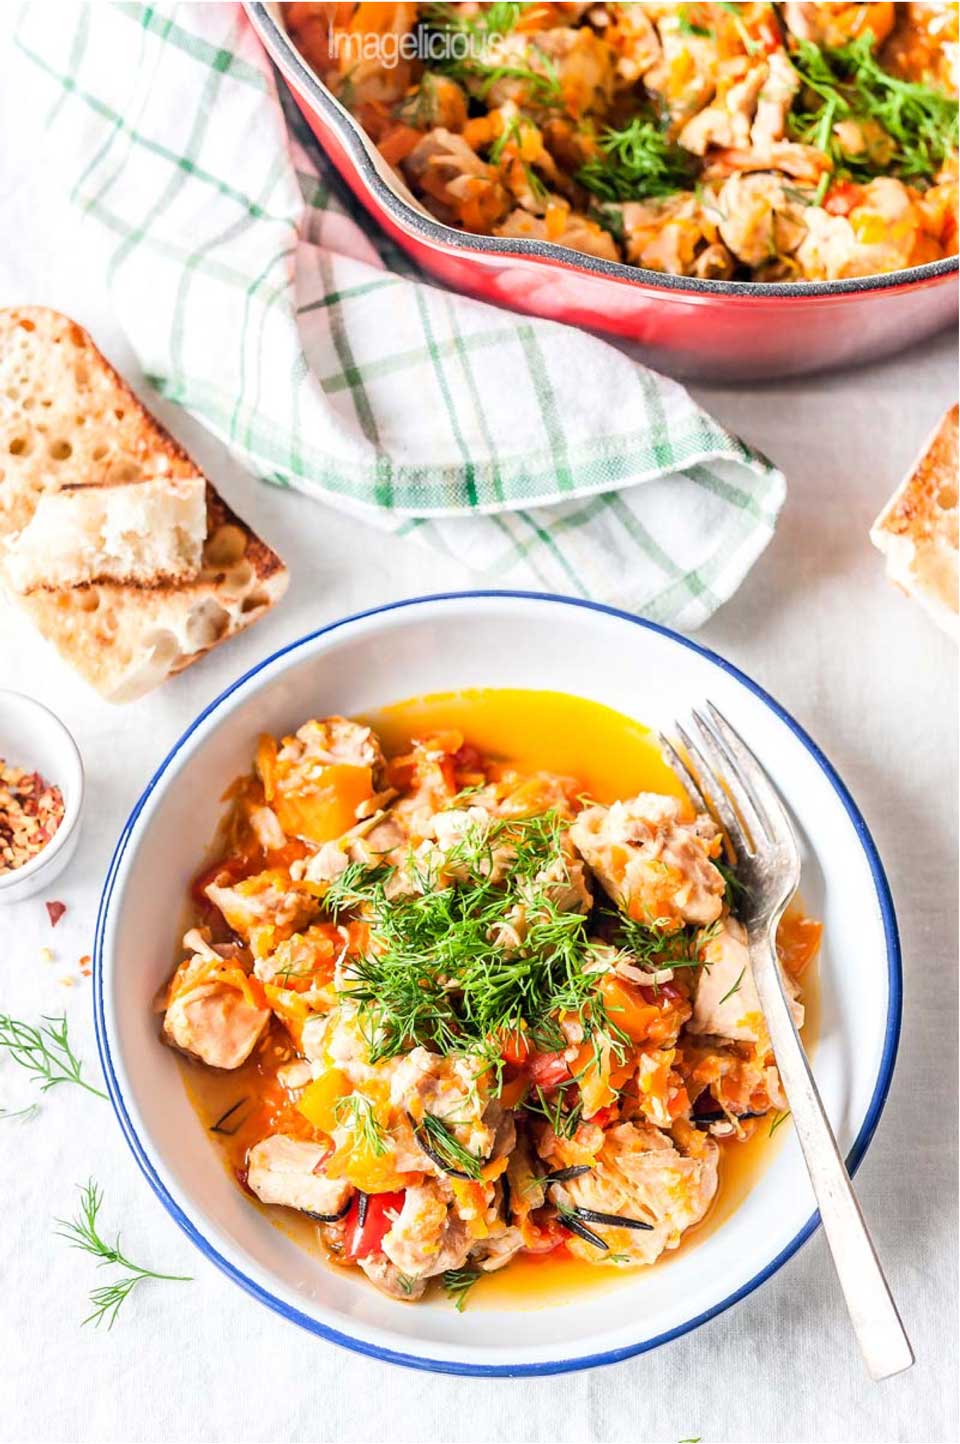 So pretty, so nutritious! Healthy Chicken Stew from Julia at Imagelicious will have you forgetting all about the beef in traditional stew recipes! Be sure to check out all our ideas!